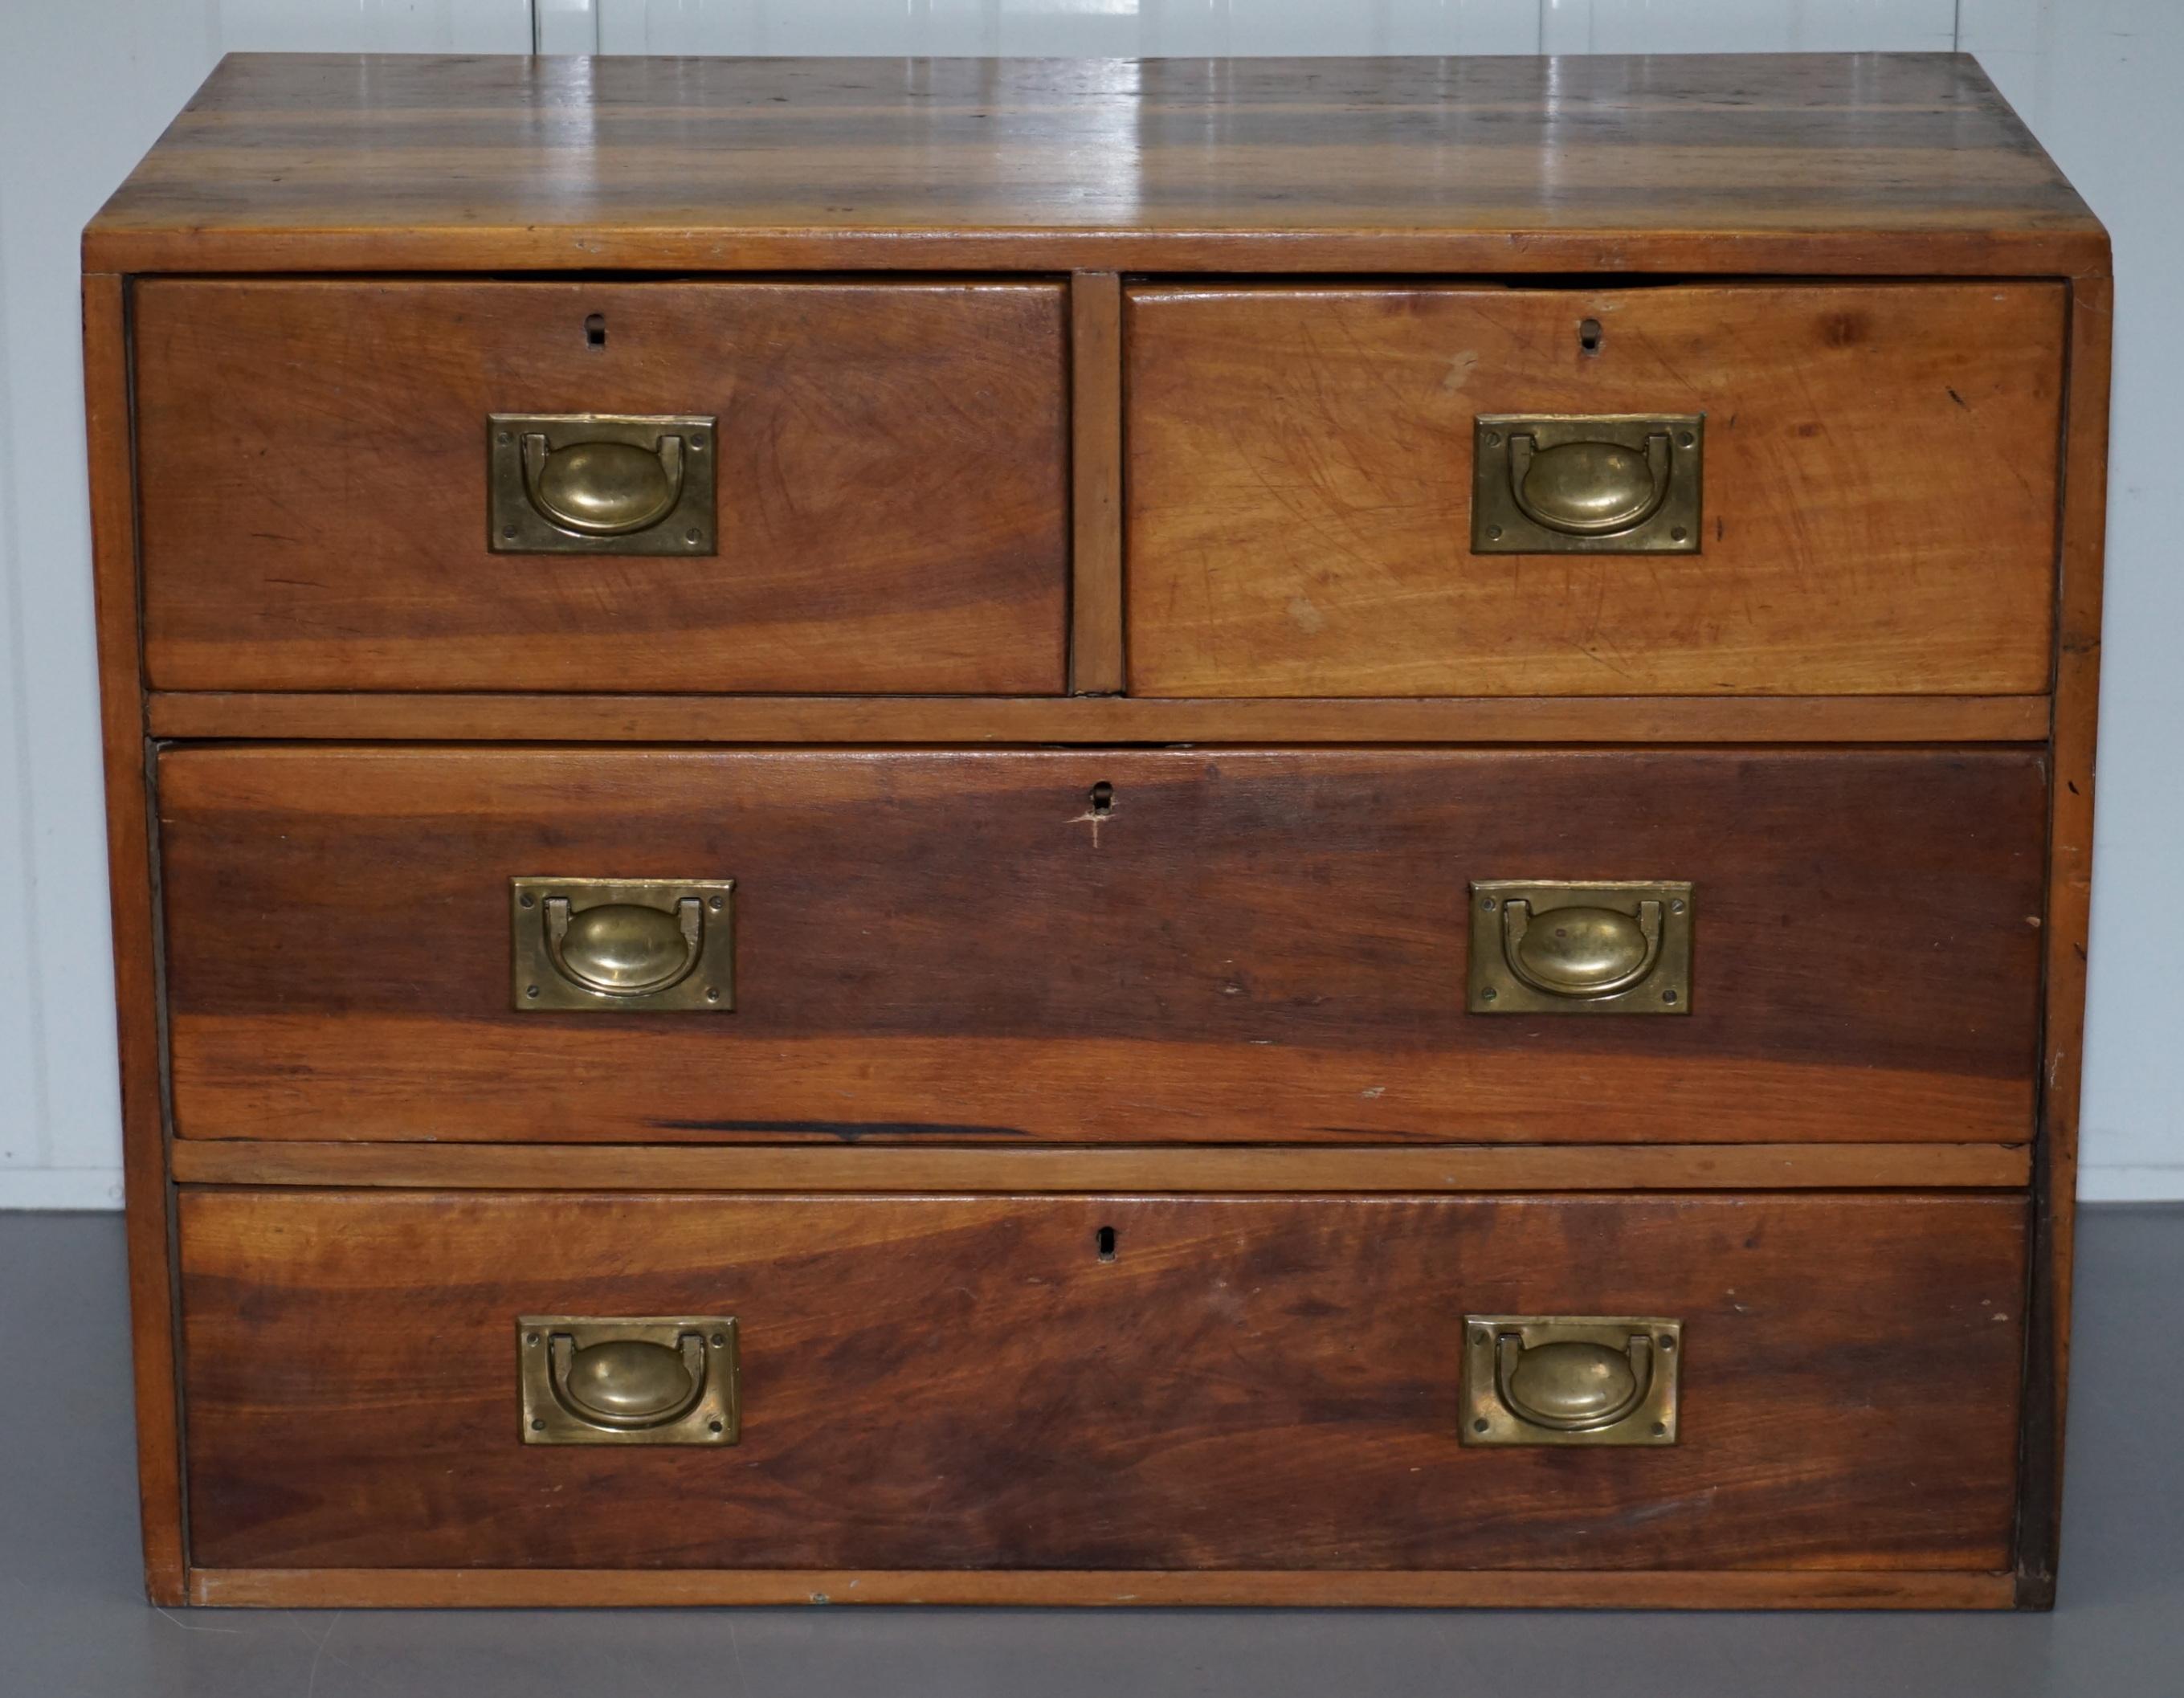 We are delighted to offer for sale one of two circa 1950s Military Campaign chests of drawers

A very good looking and well made piece in Camphor wood.

This one has a lovely timber patina, it really glows from all angles, the drawers all